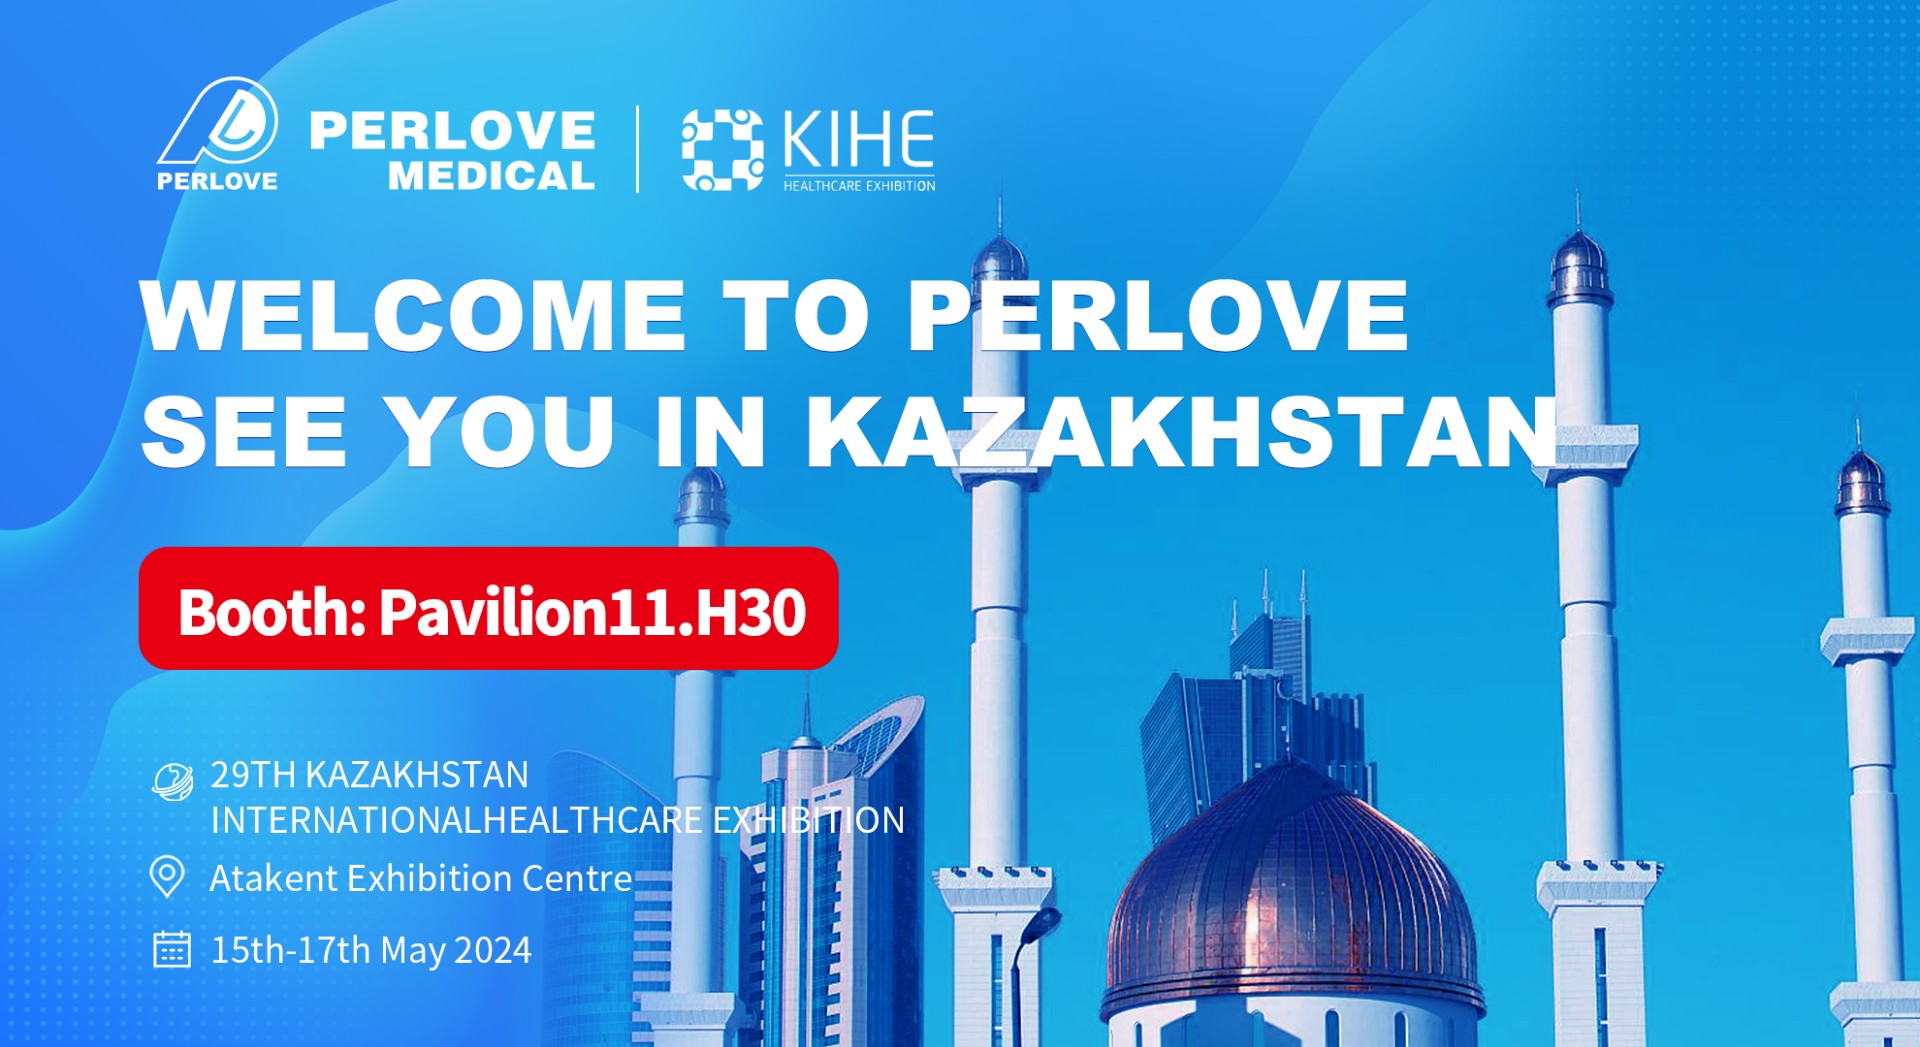 Perlove will Present State-of-the-Art Medical Imaging Solutions at KIHE Exhibition 2024 